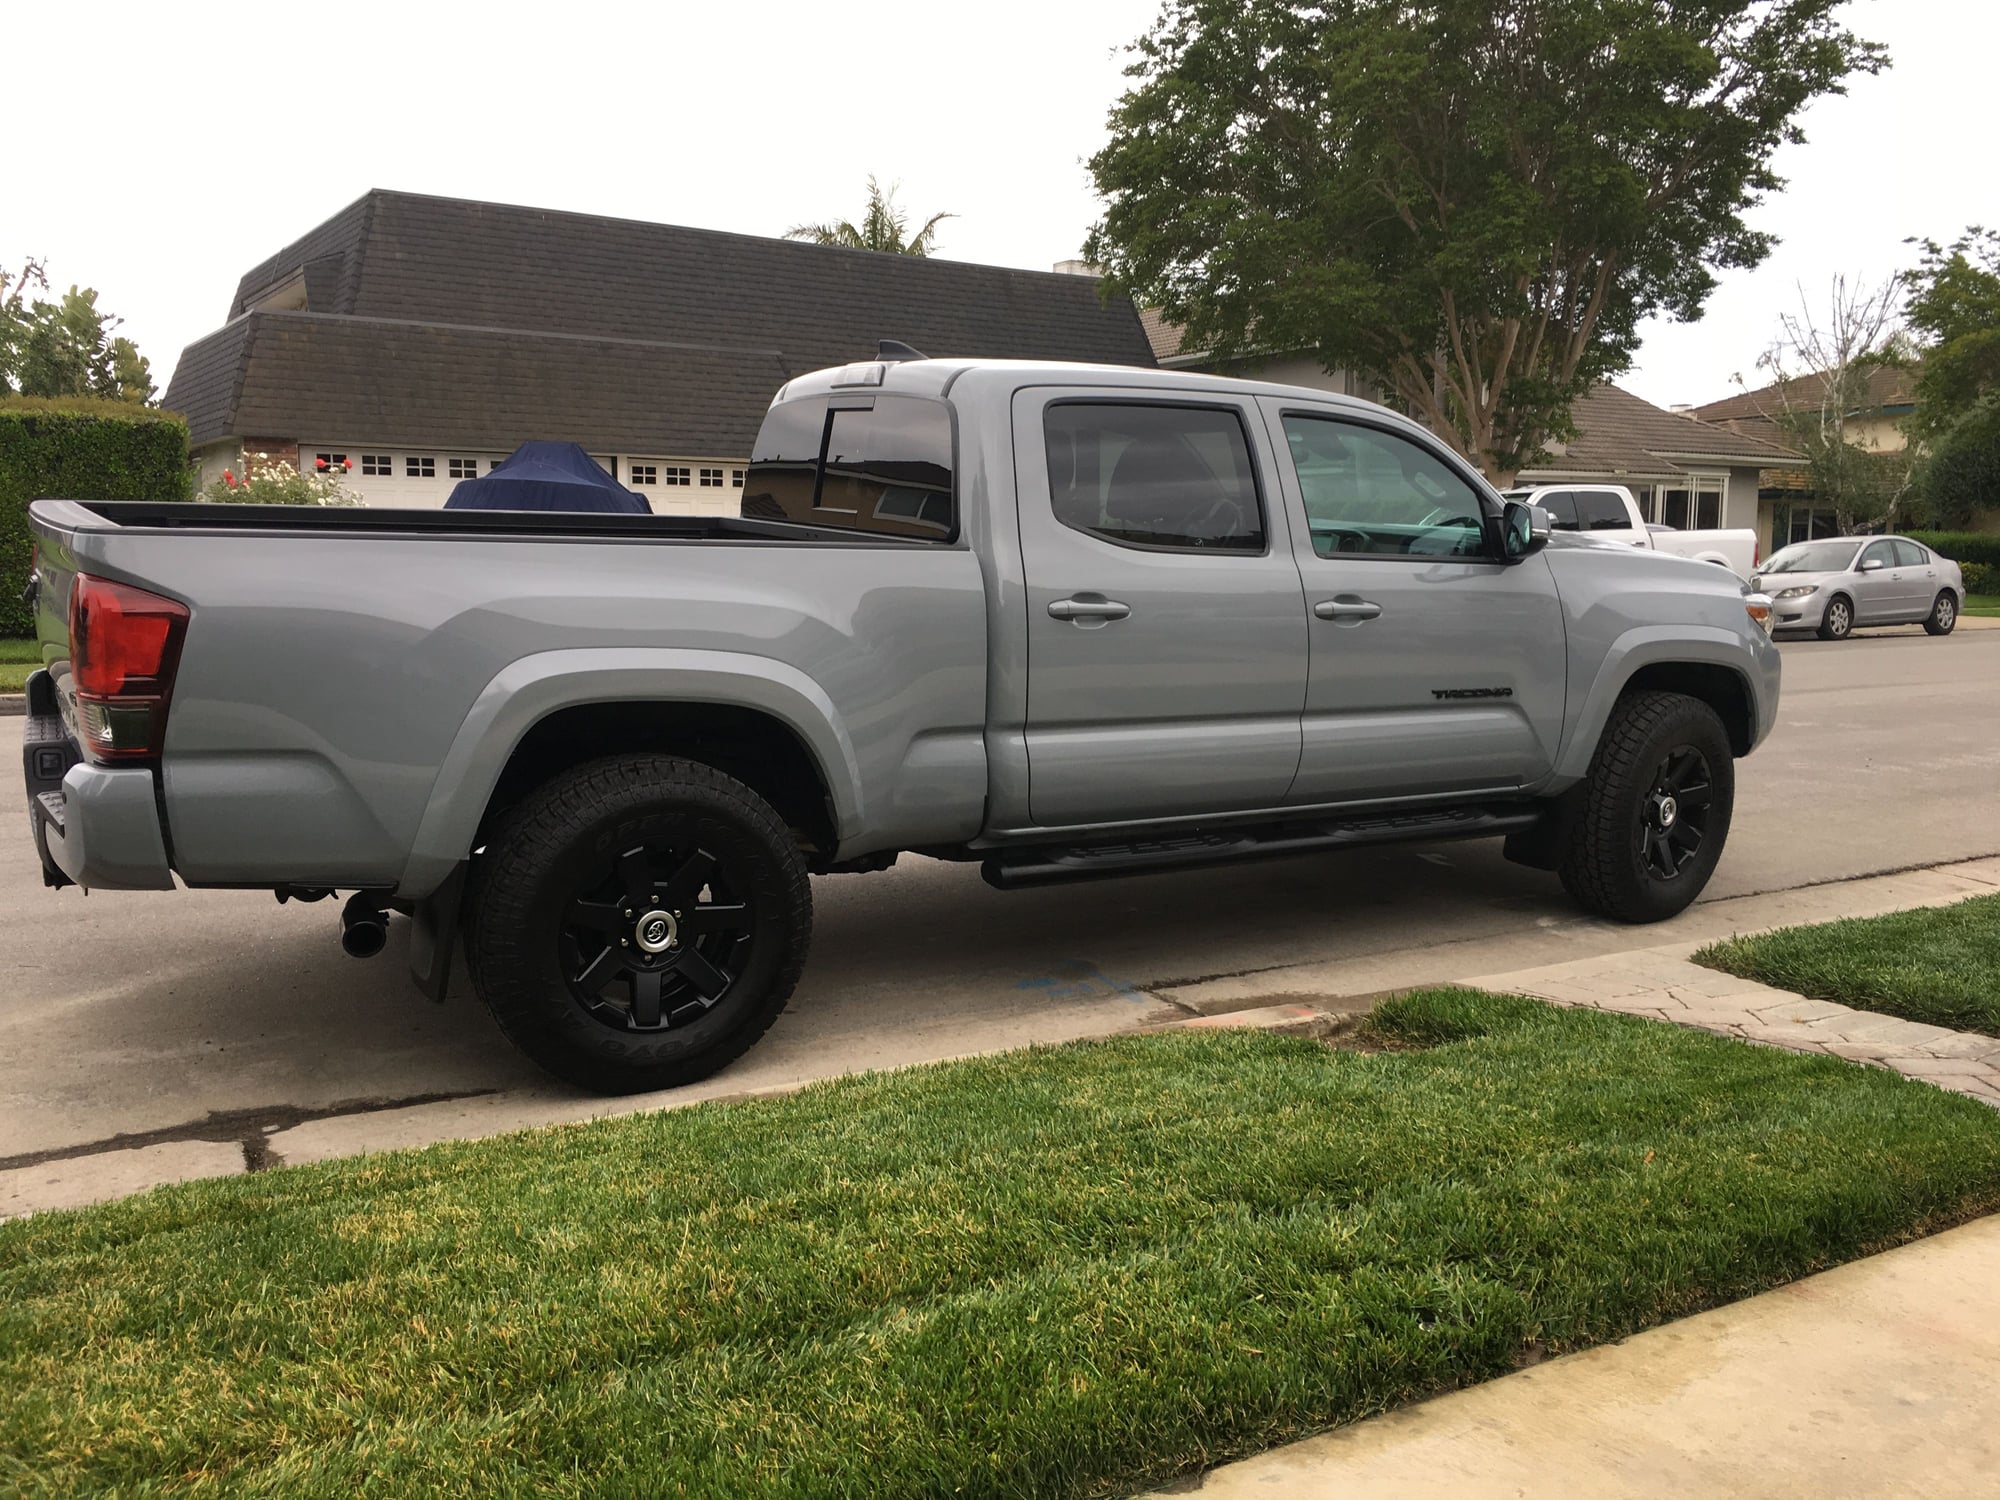 2019 Toyota Tacoma - 2019 Toyota Tacoma 4WD TRD Sport - Dbl Cab Long Bed - Loaded - $38,500 - Used - VIN 3tmdz5bn6km062869 - 3,600 Miles - 6 cyl - 4WD - Automatic - Truck - Gray - Huntington Beach, CA 92646, United States